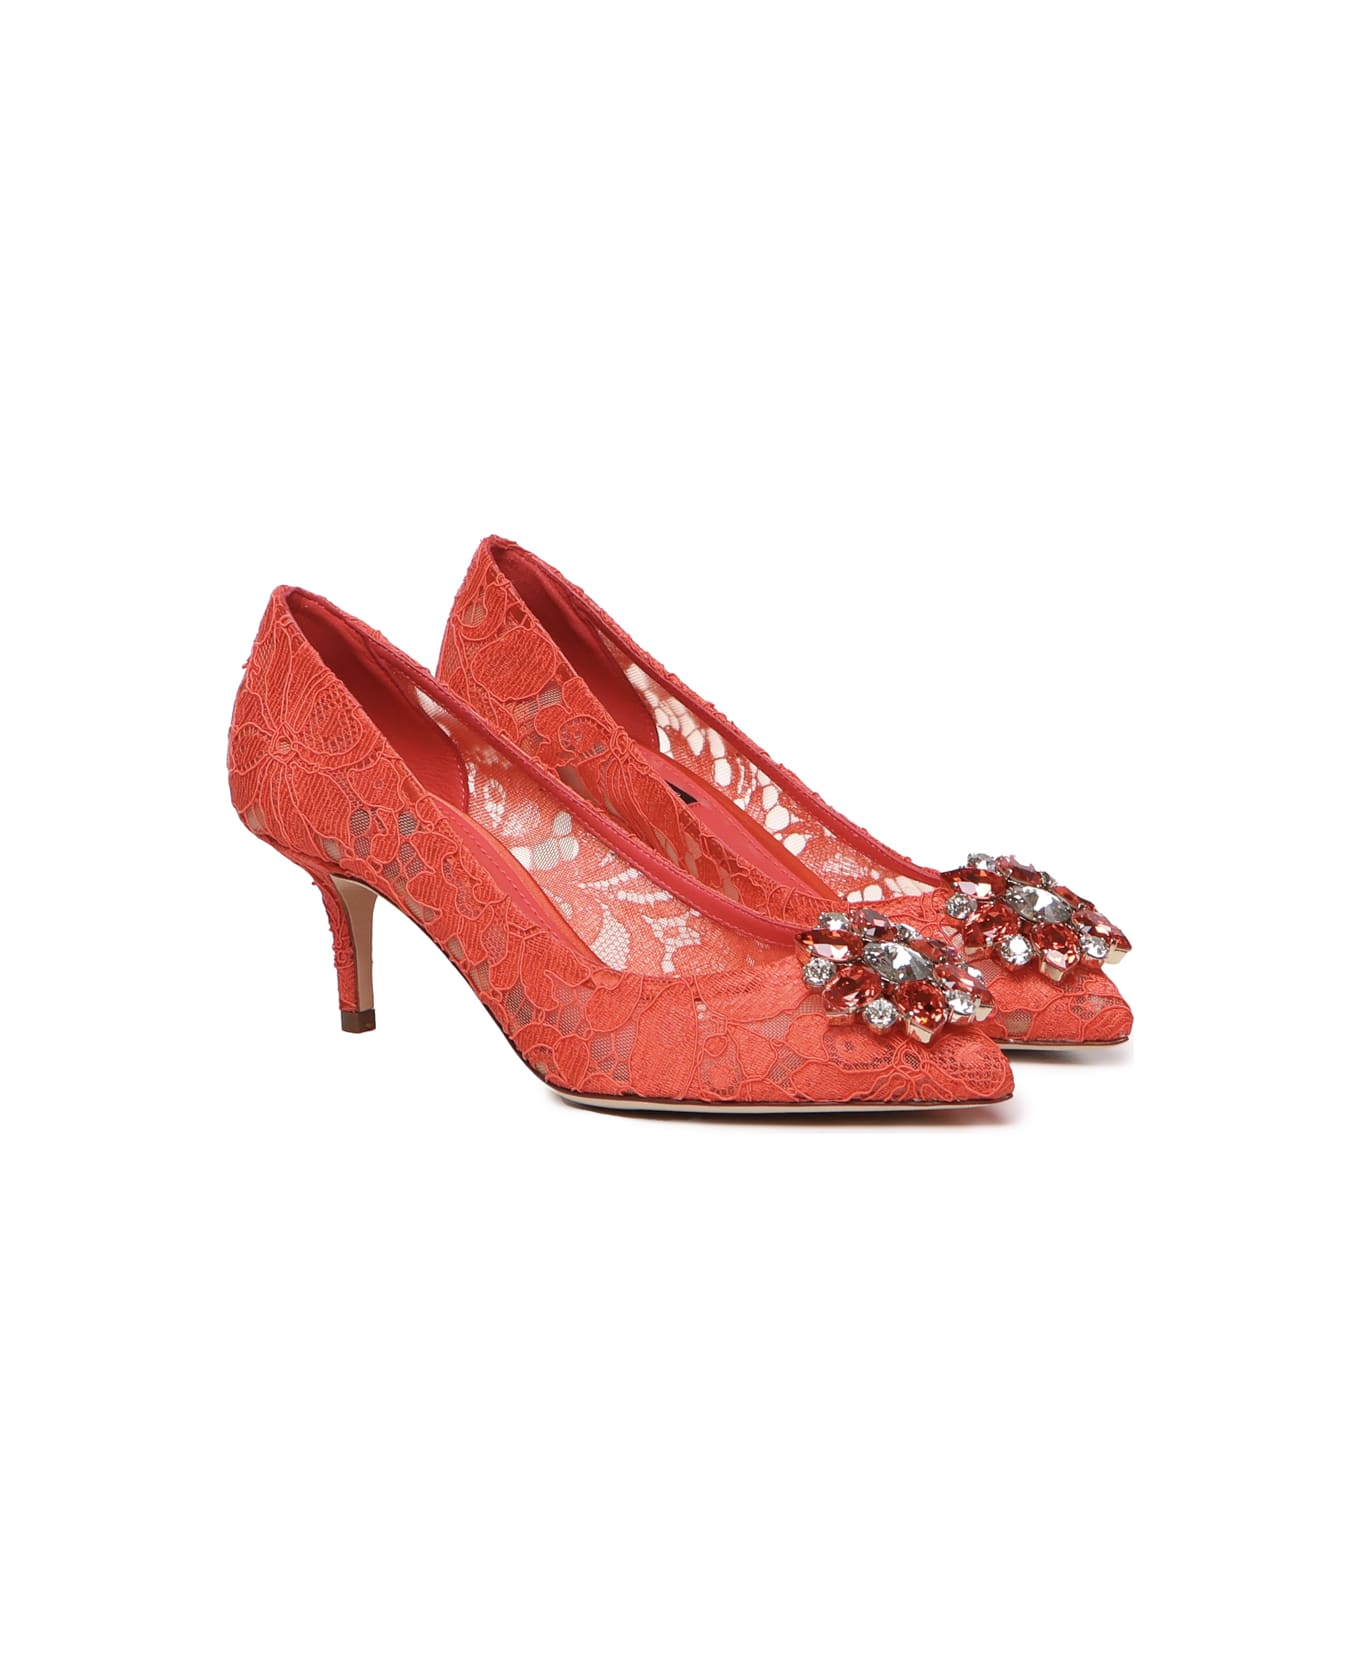 Dolce & Gabbana Taormina Lace Pumps With Crystals - Coral